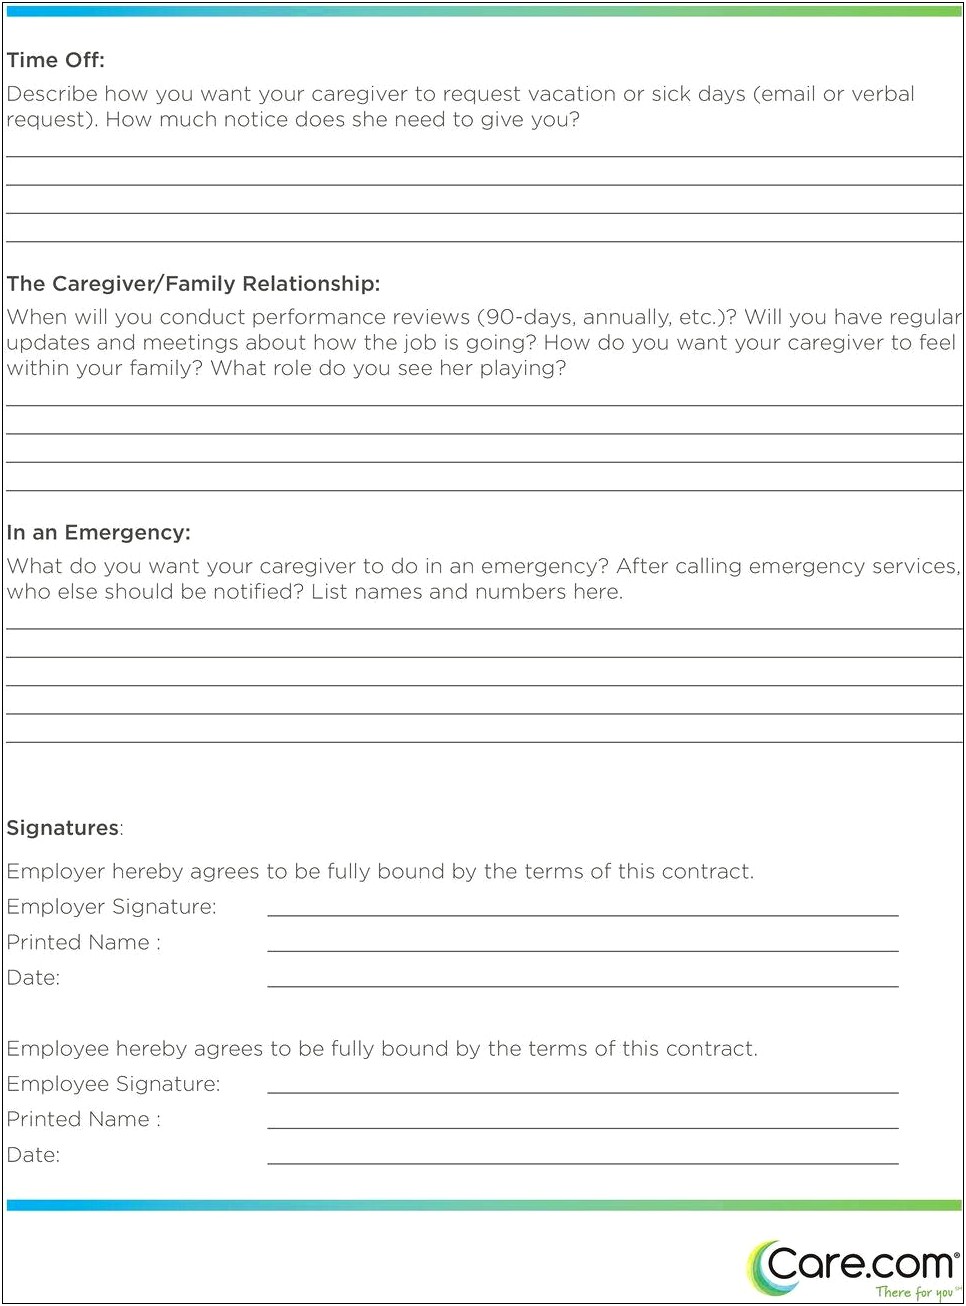 Free Duration Of Care Contract Template